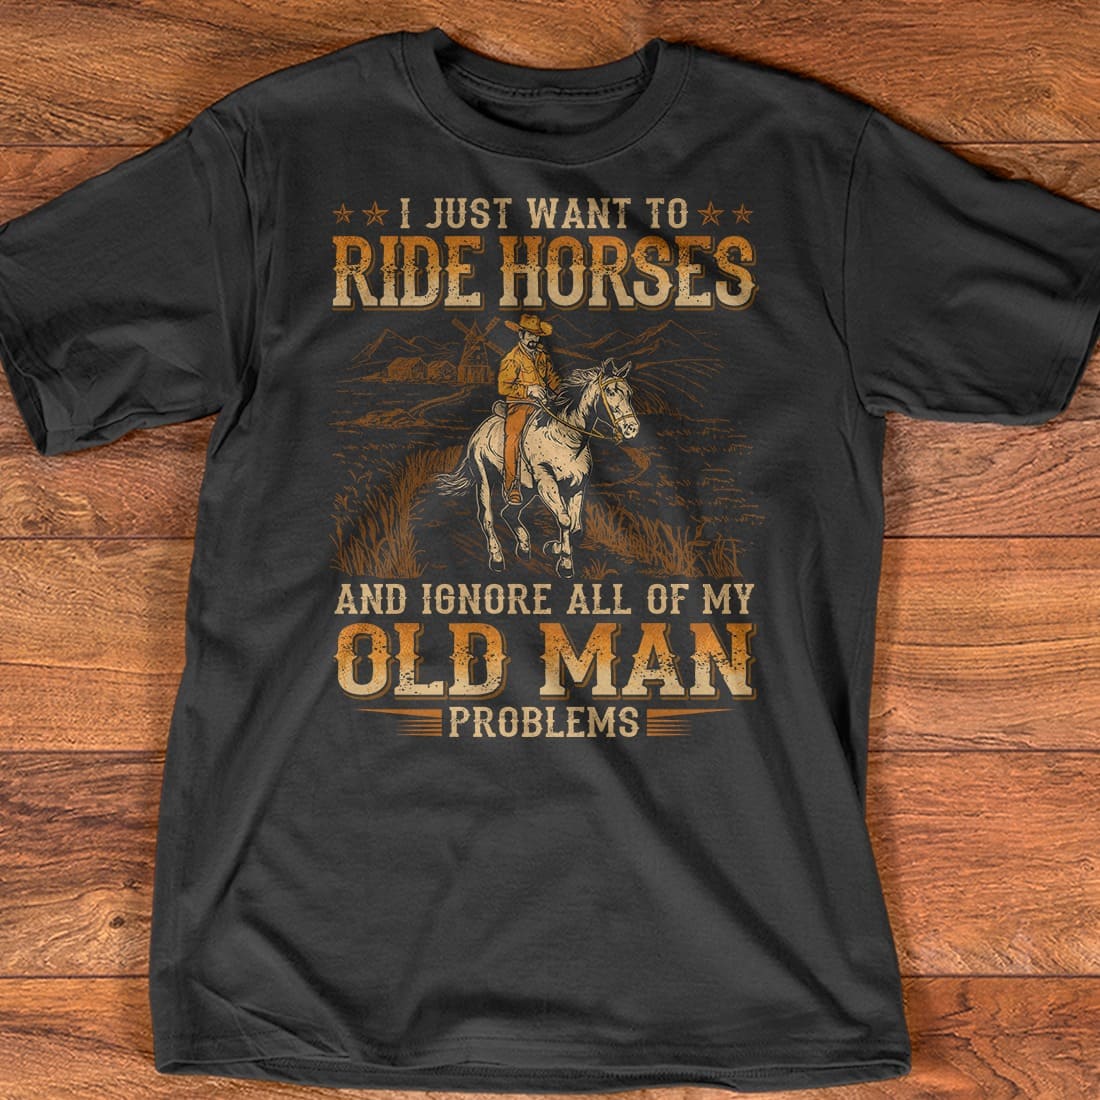 I just want to ride horses and ignore all of my old man problems - Riding horse the hobby